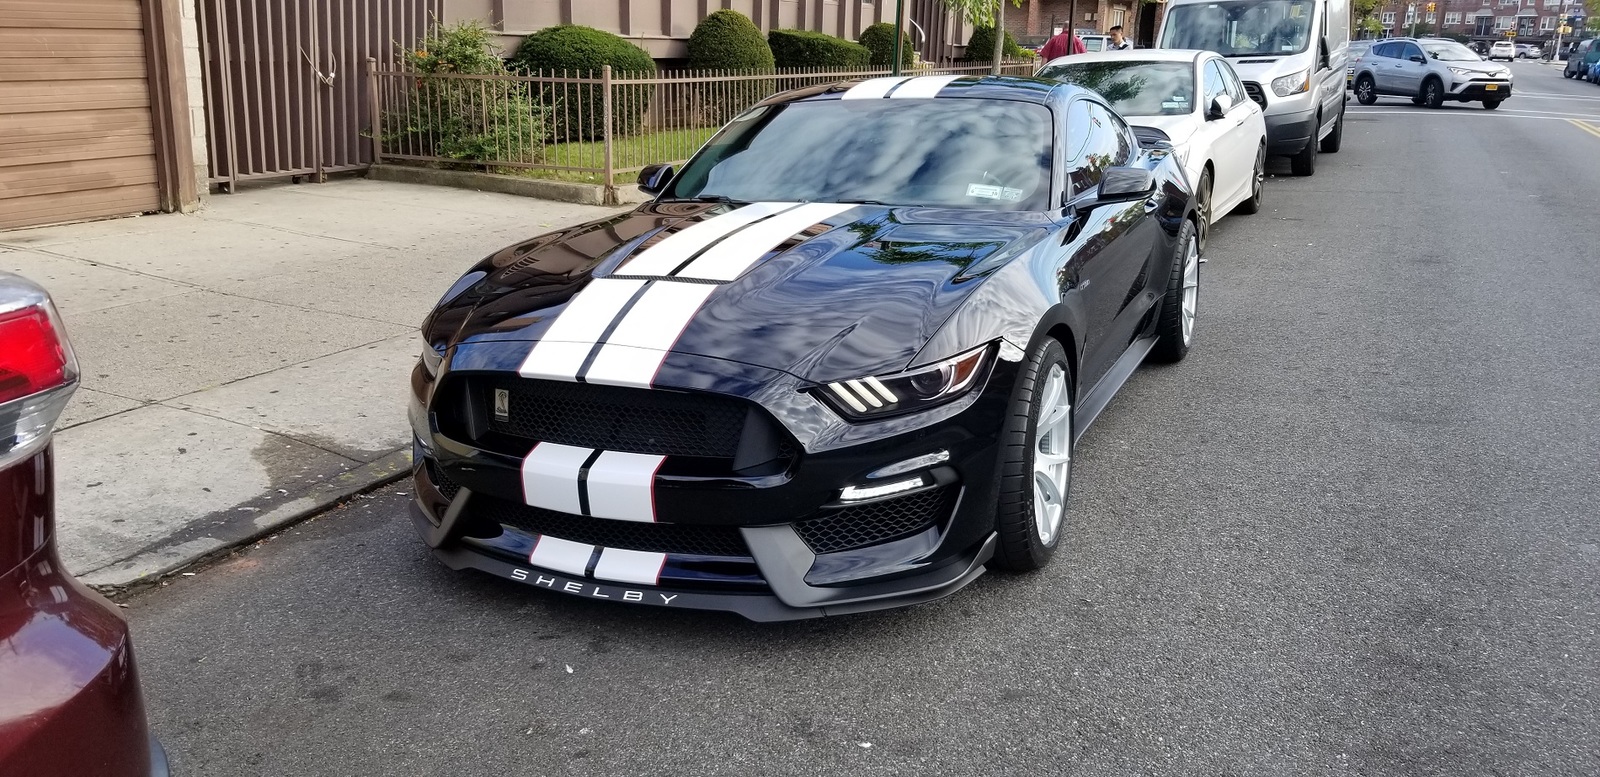 w-black-ford-mustang-shelby-gt350-forgestar-cf5v-brilliant-silver-concave-rotory-forged-wheels-2.jpg